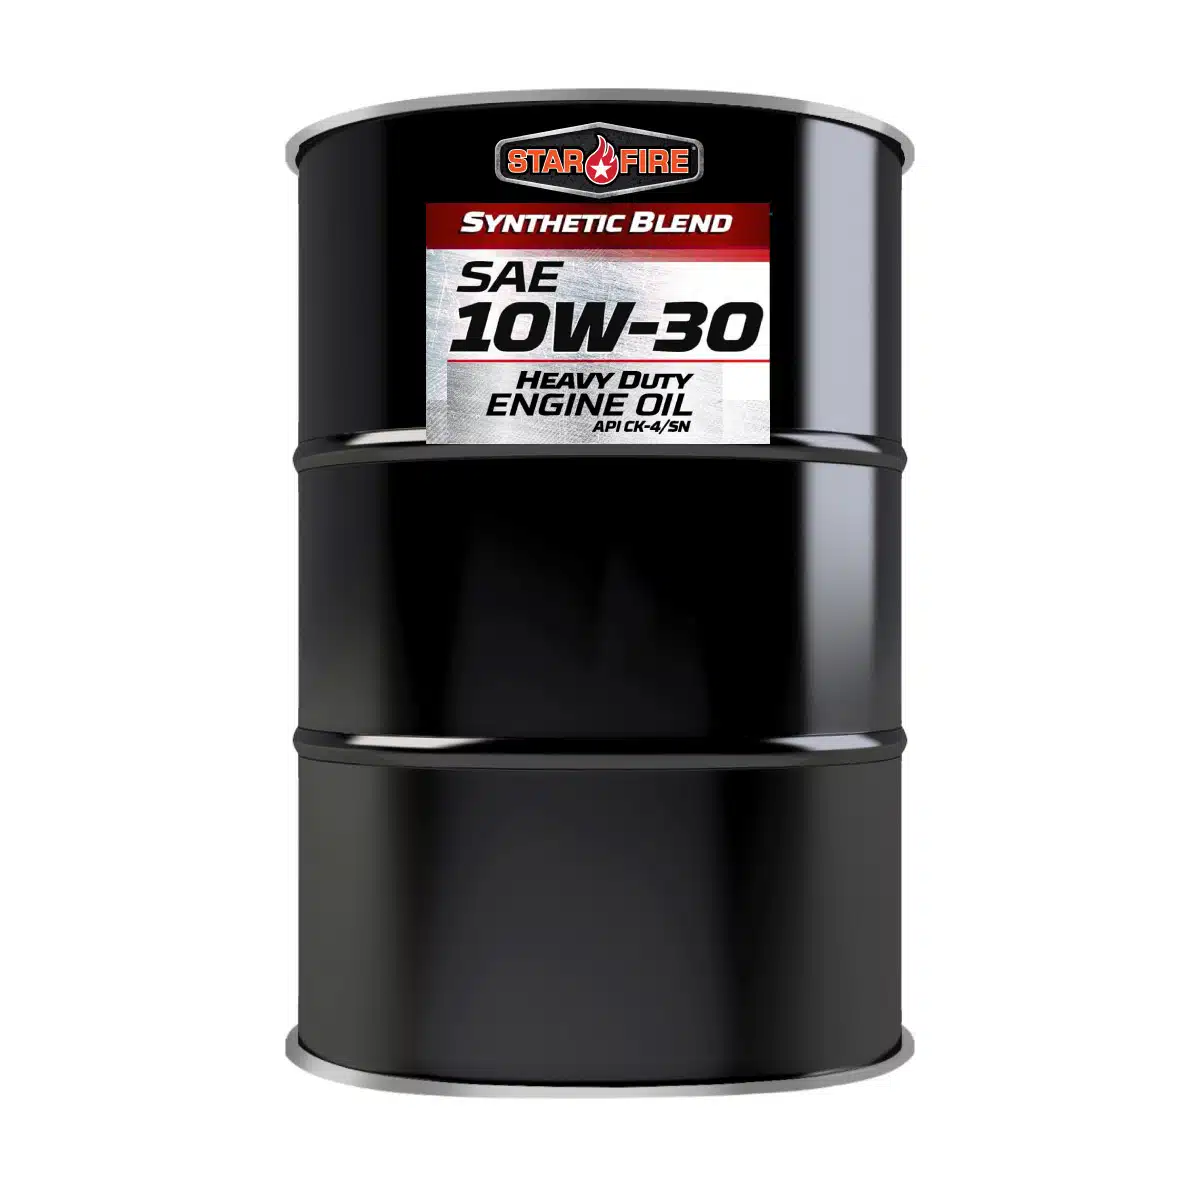 55 Drum Synthetic Blend Heavy Duty Engine Oil 10w-30